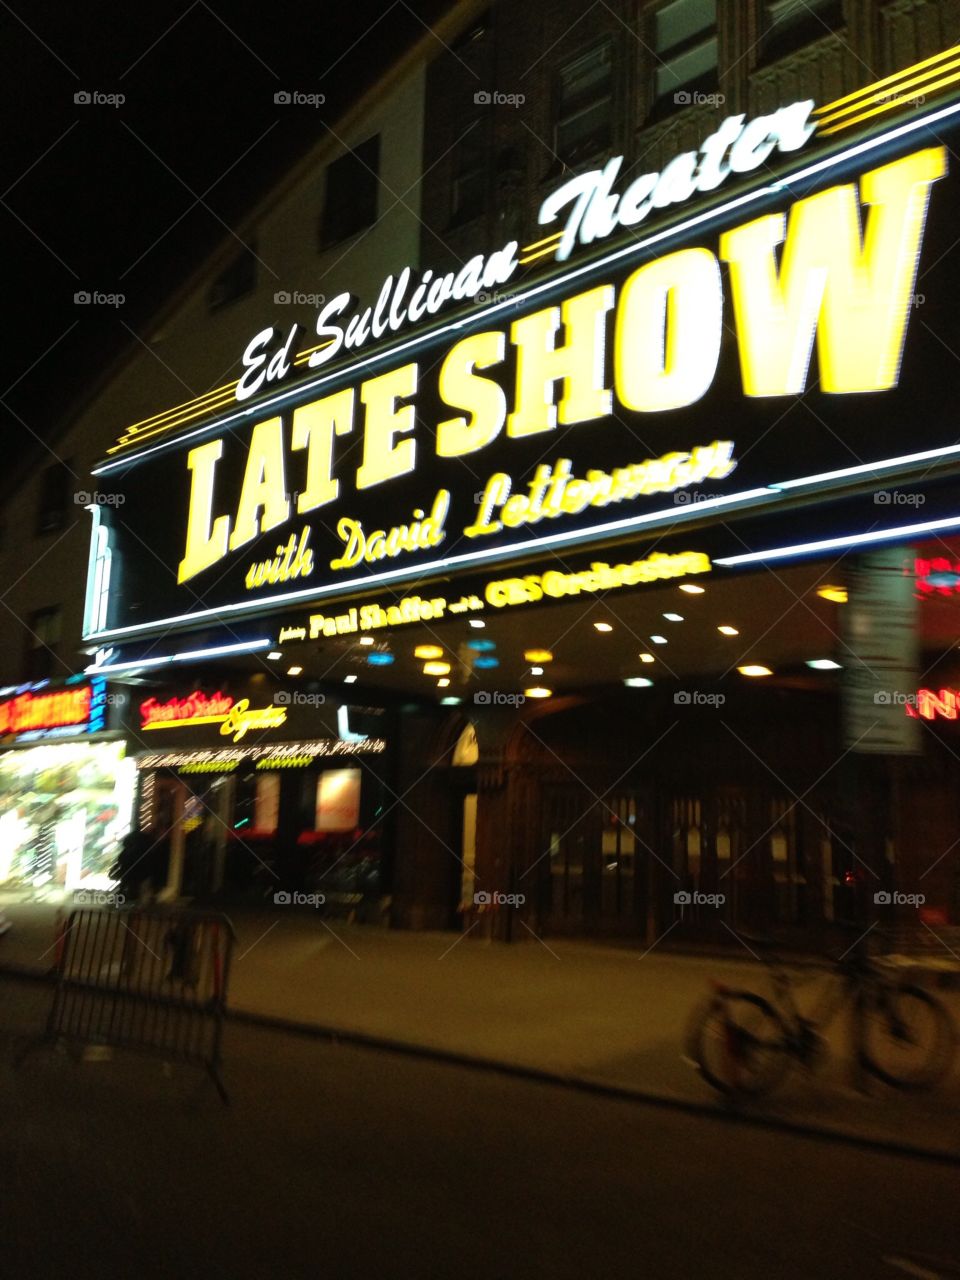 The classic late show 